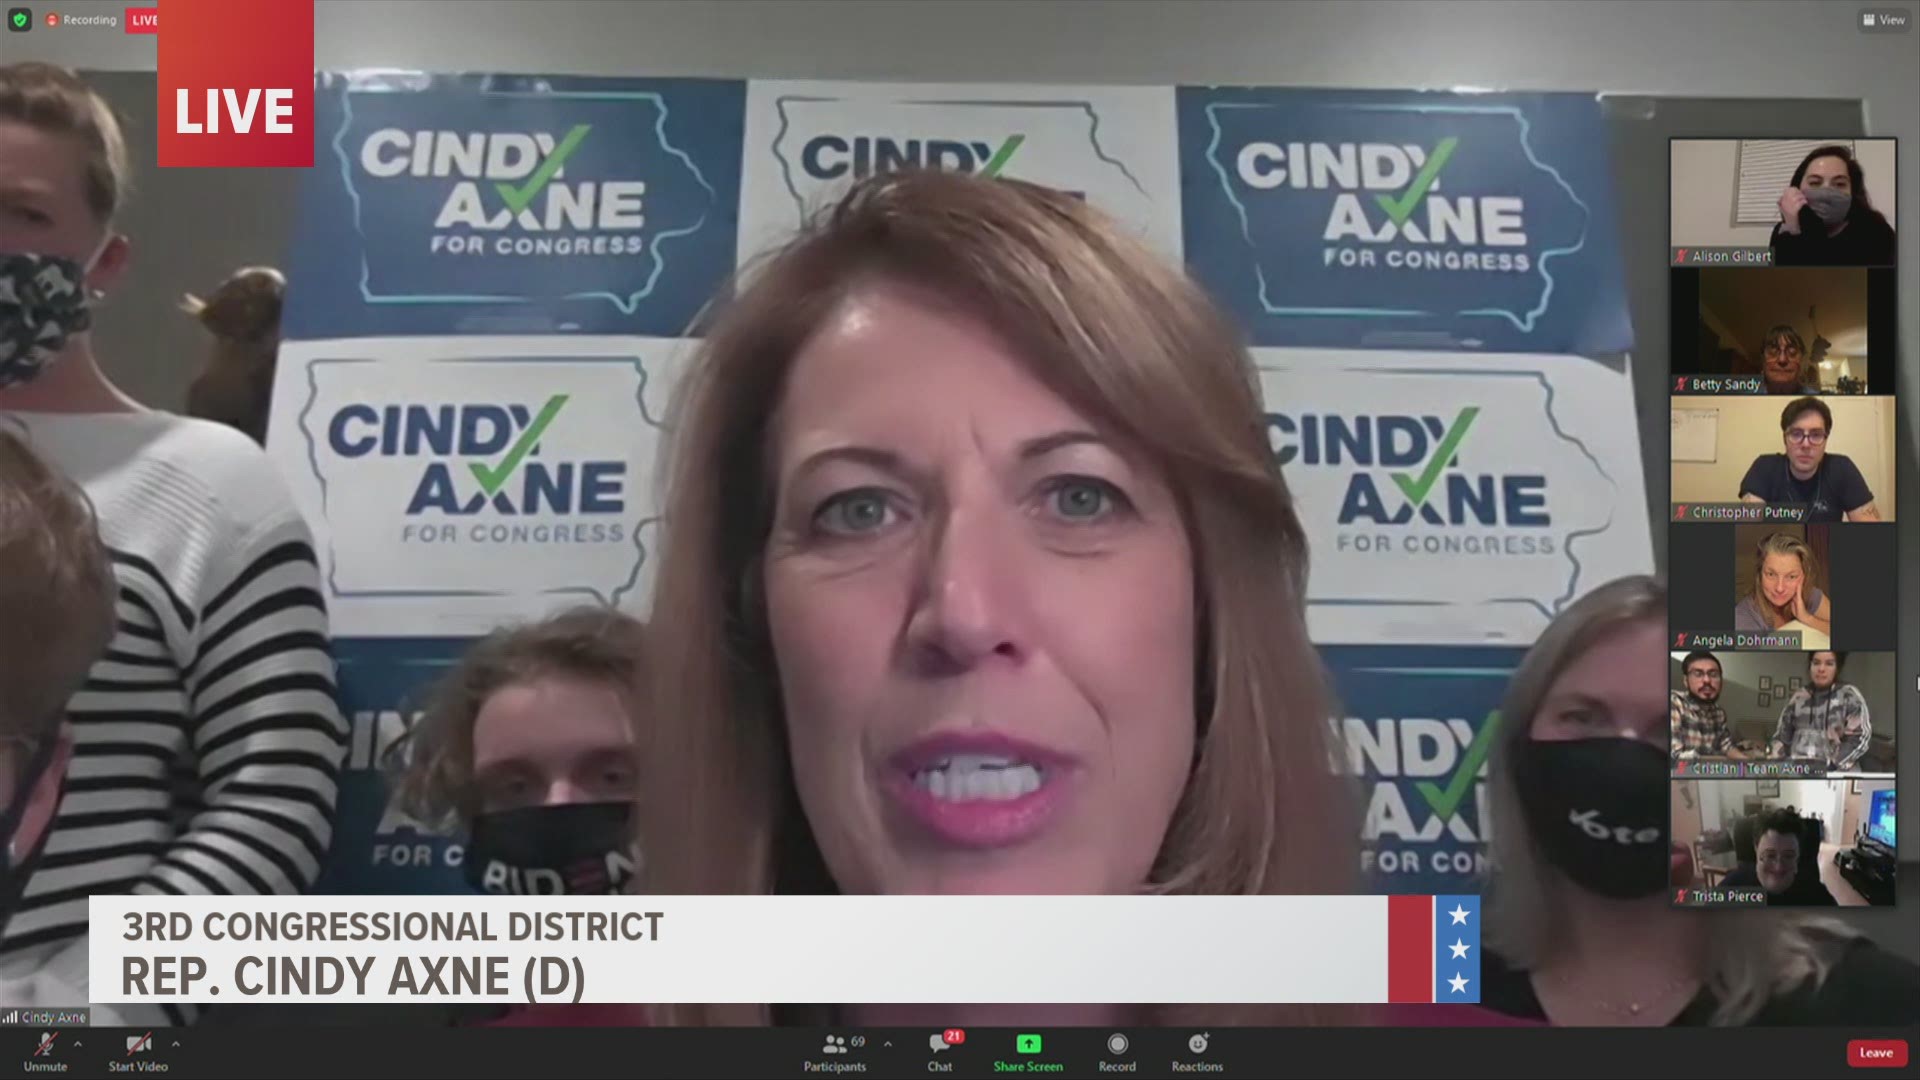 Axne beat former Rep. David Young by a razor-thin margin, taking home just over 6,000 more votes than her challenger.